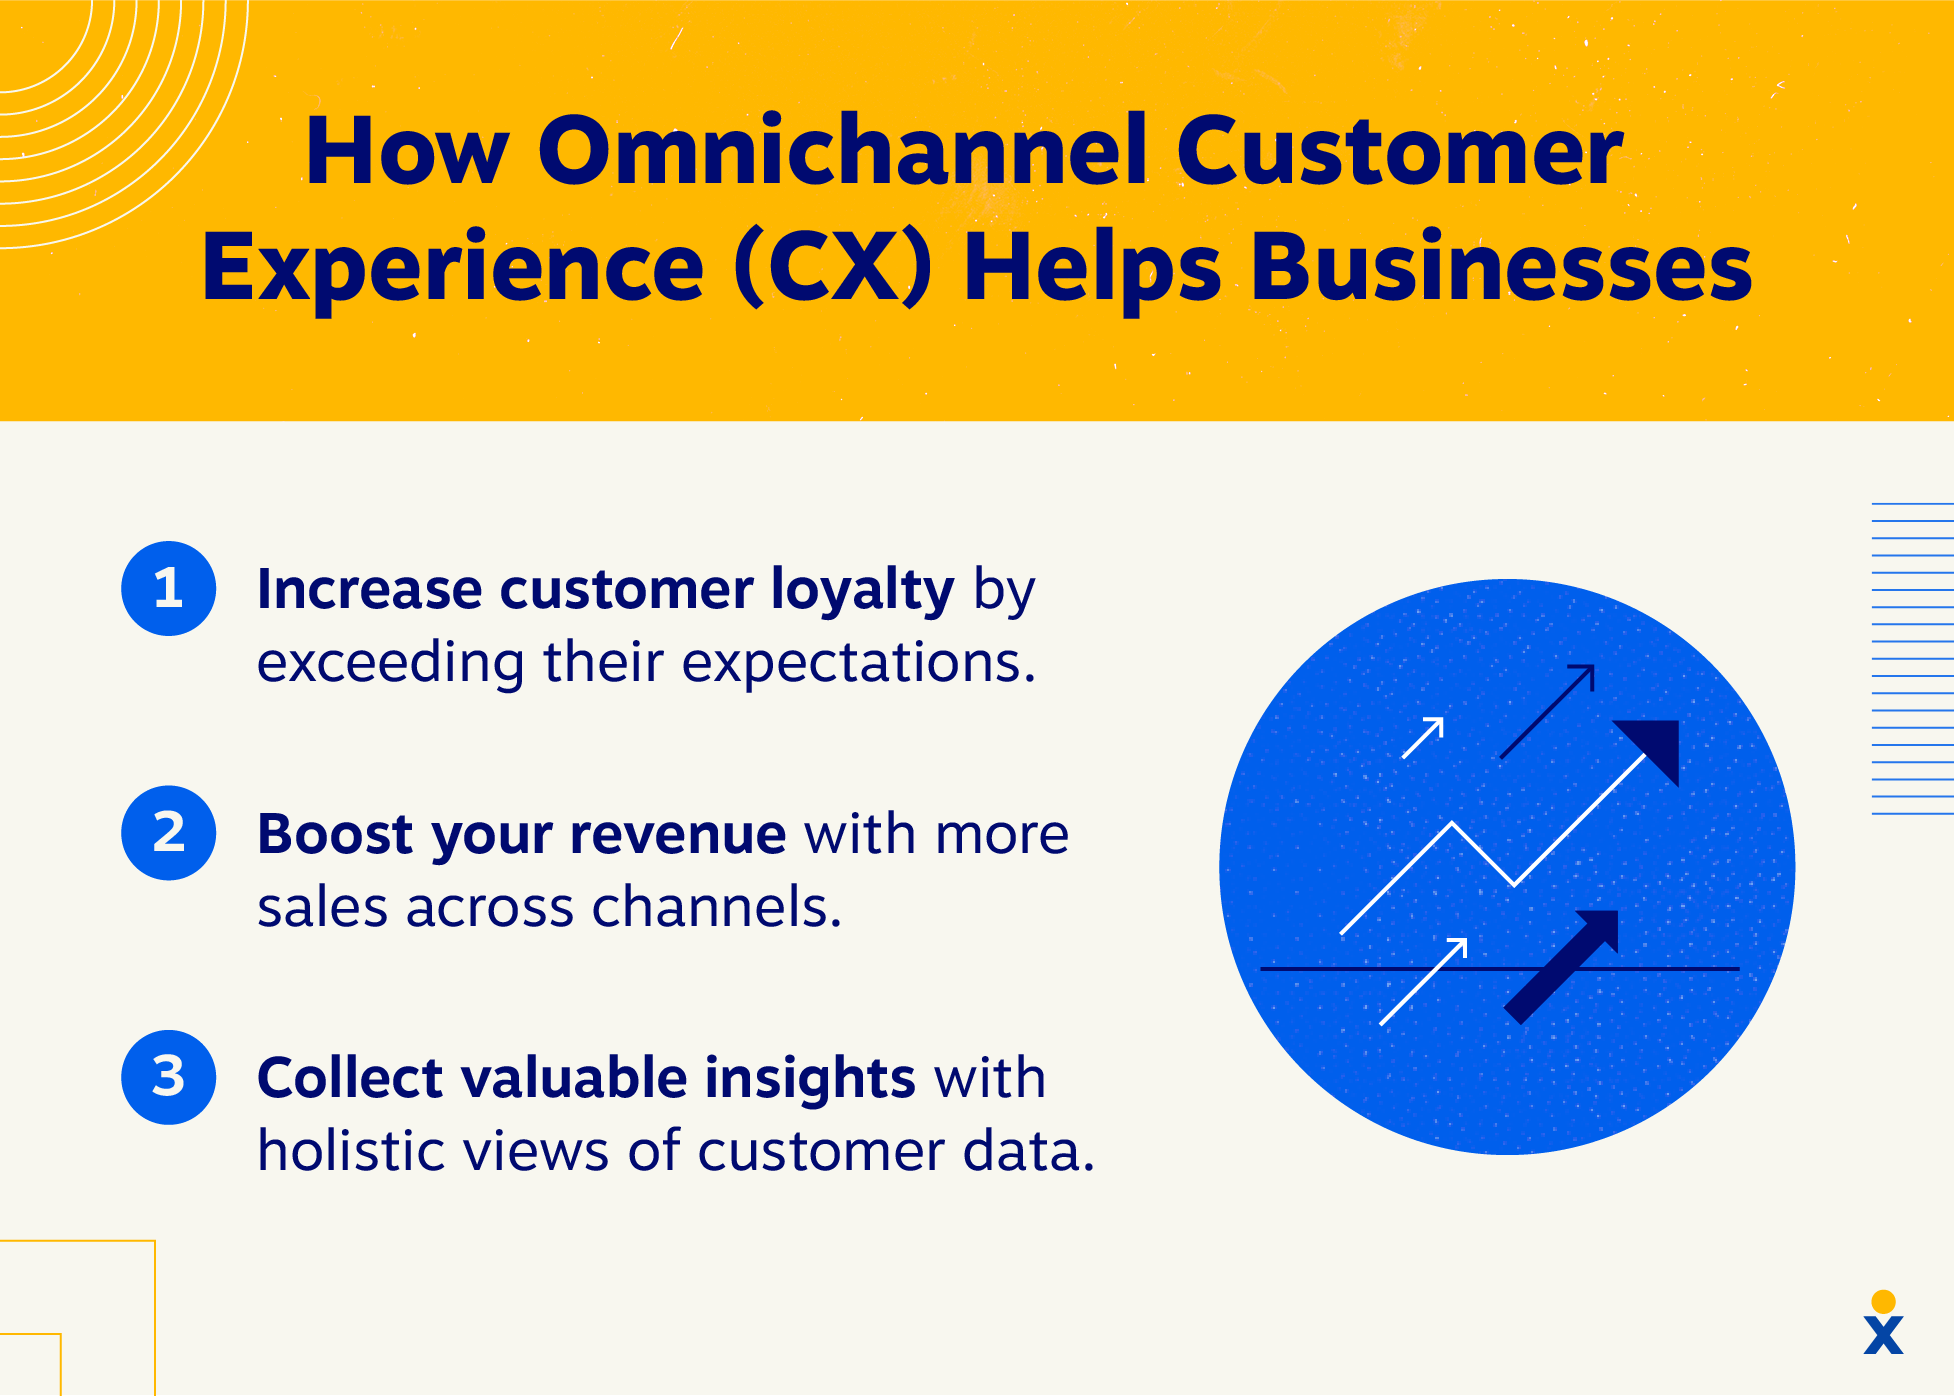 The business benefits of an omnichannel customer experience.